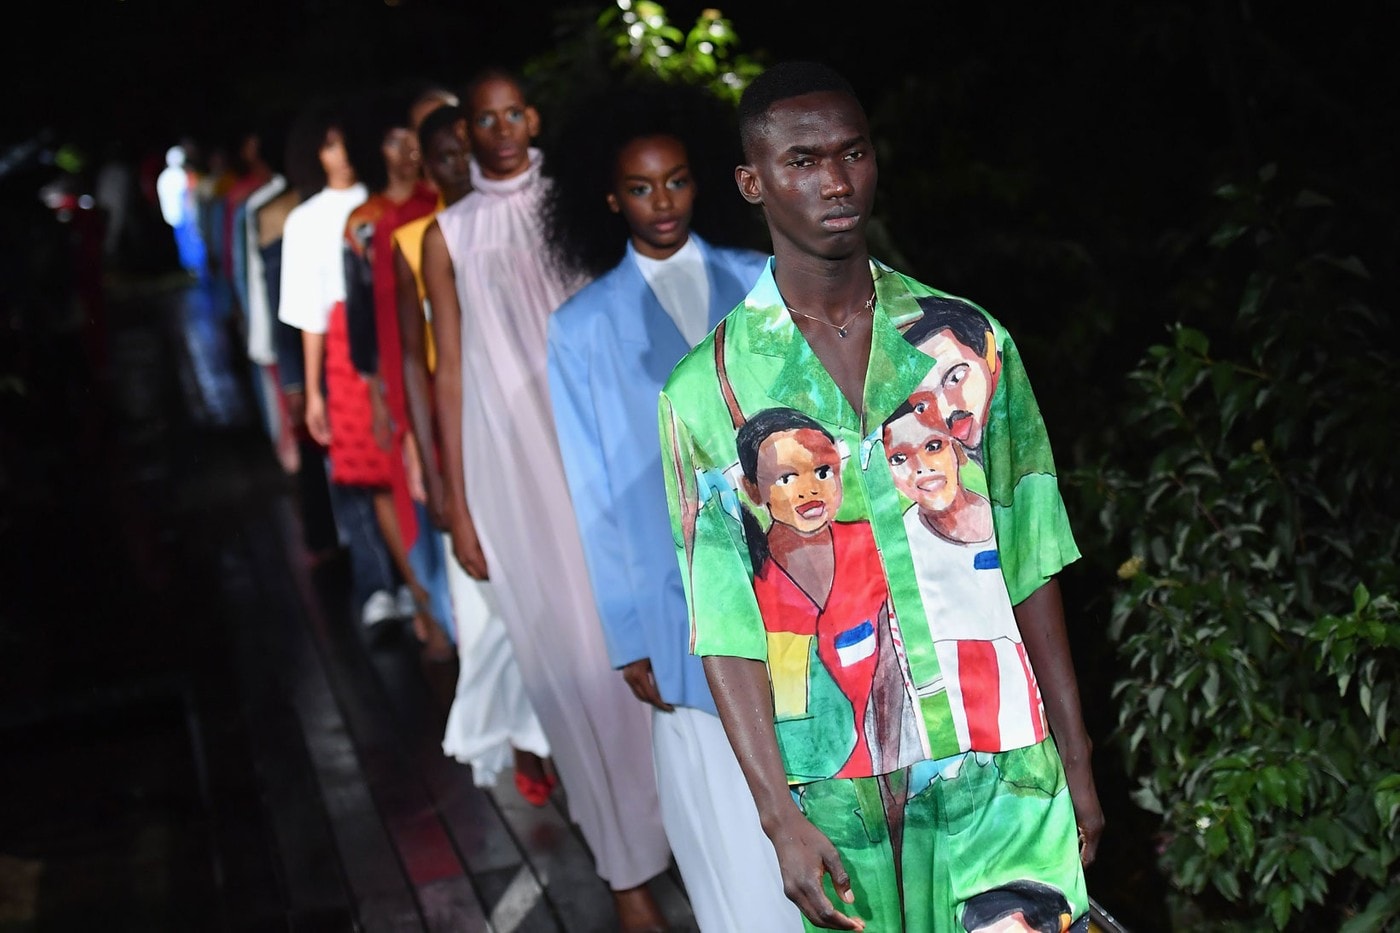 Pyer Moss Spring/Summer 2019 Collection New York Fashion Week Show